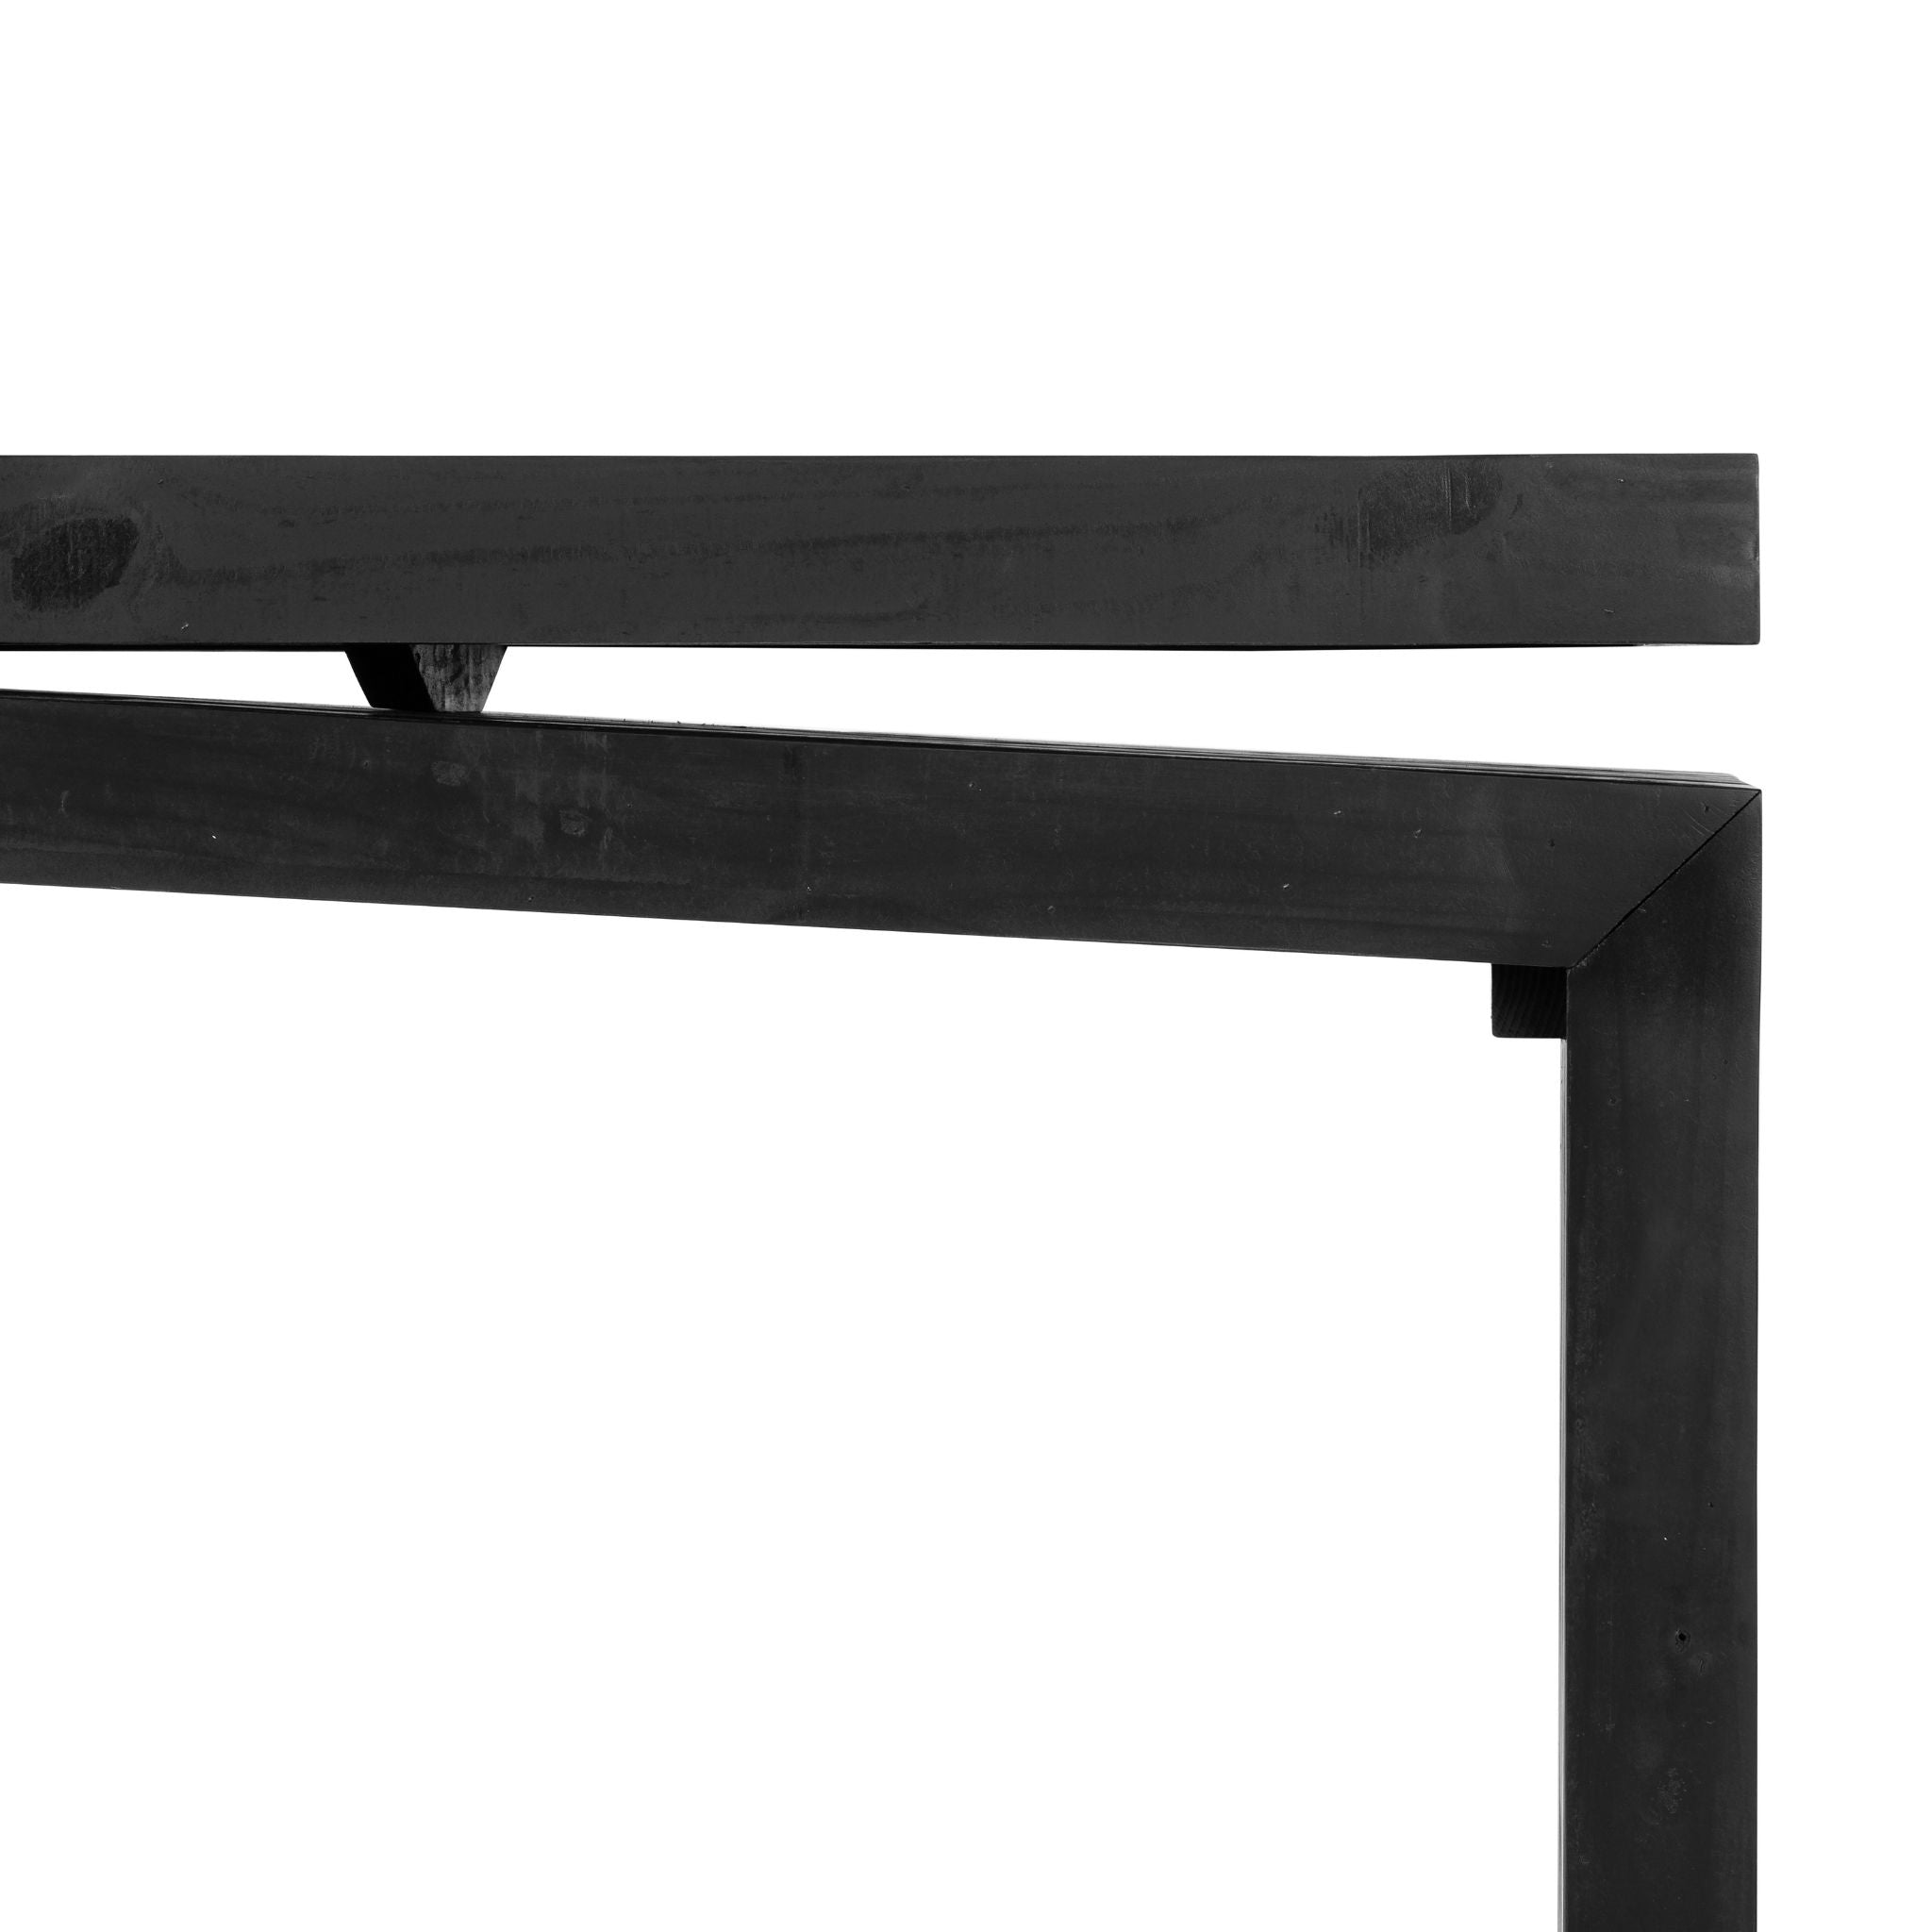 Simply Elevated - Embrace the simplicity and natural beauty of our Matthes Console Table. Crafted from solid reclaimed pine, this console combines simplicity and functionality with its streamlined design and traditional black finish.